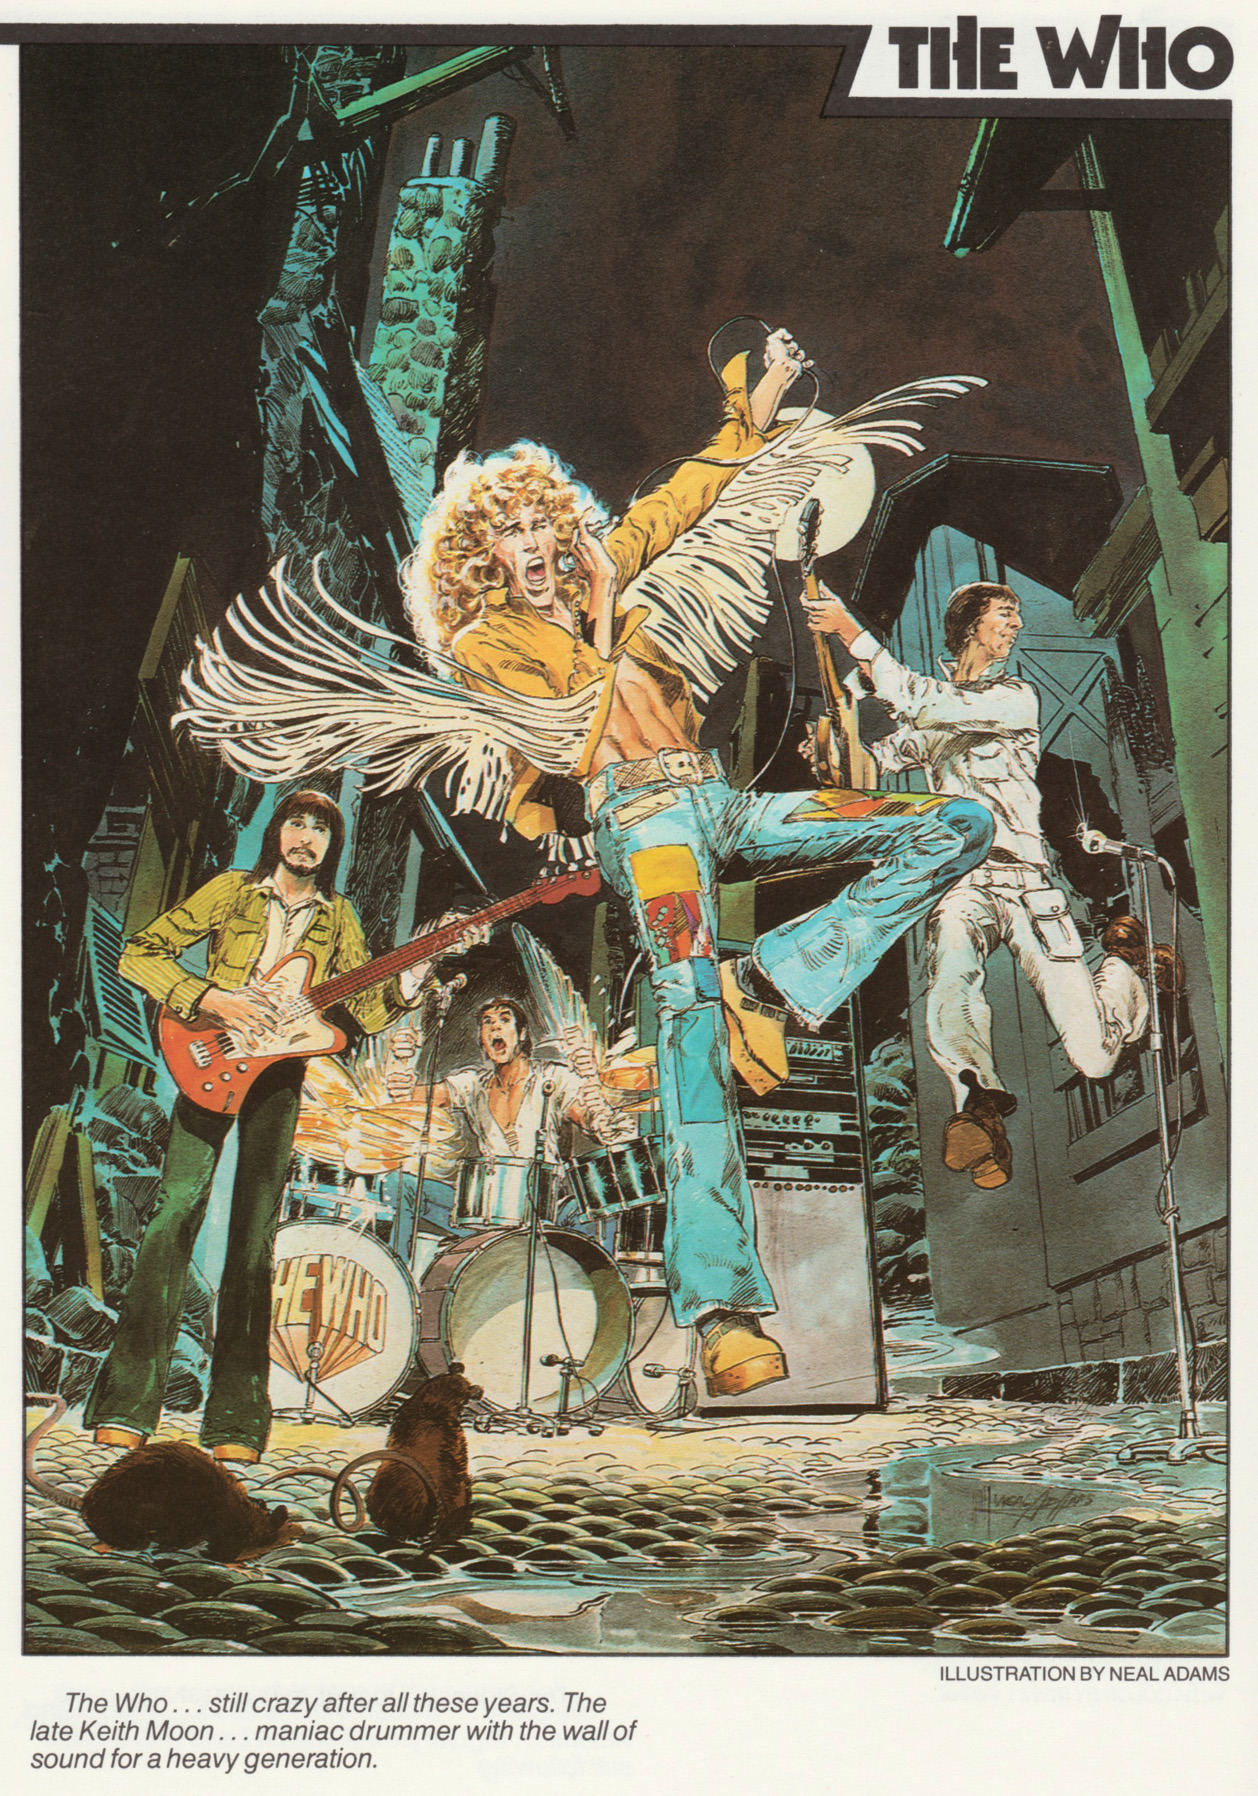 The Who, by Neal Adams. From Visions of Rock ( Proteus Books, 1981). From a charity